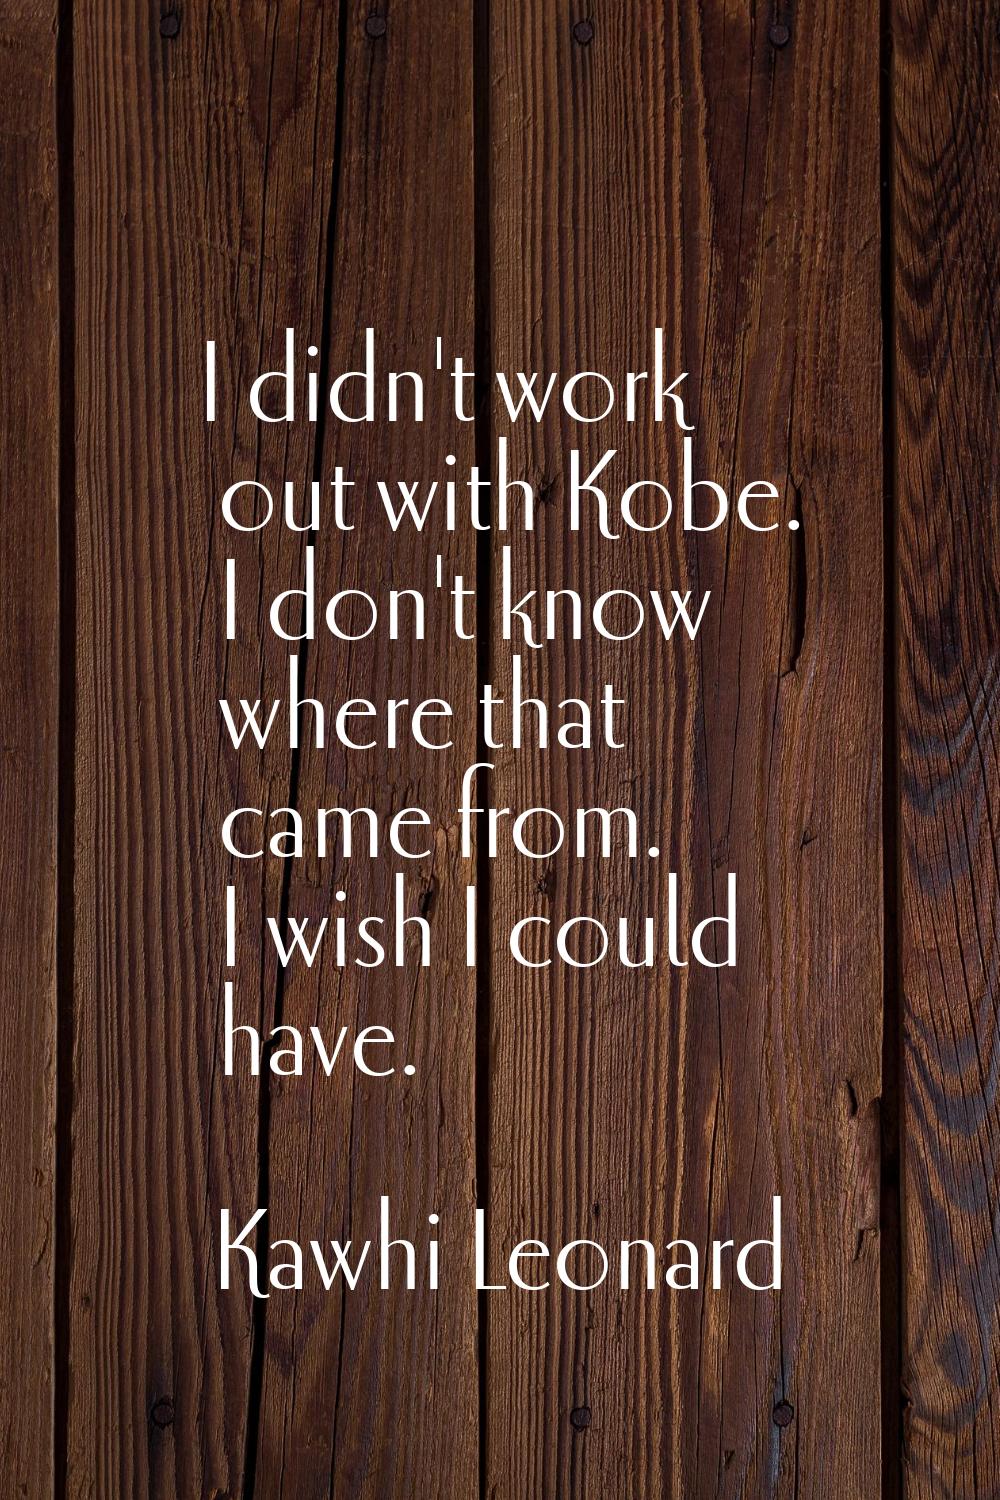 I didn't work out with Kobe. I don't know where that came from. I wish I could have.